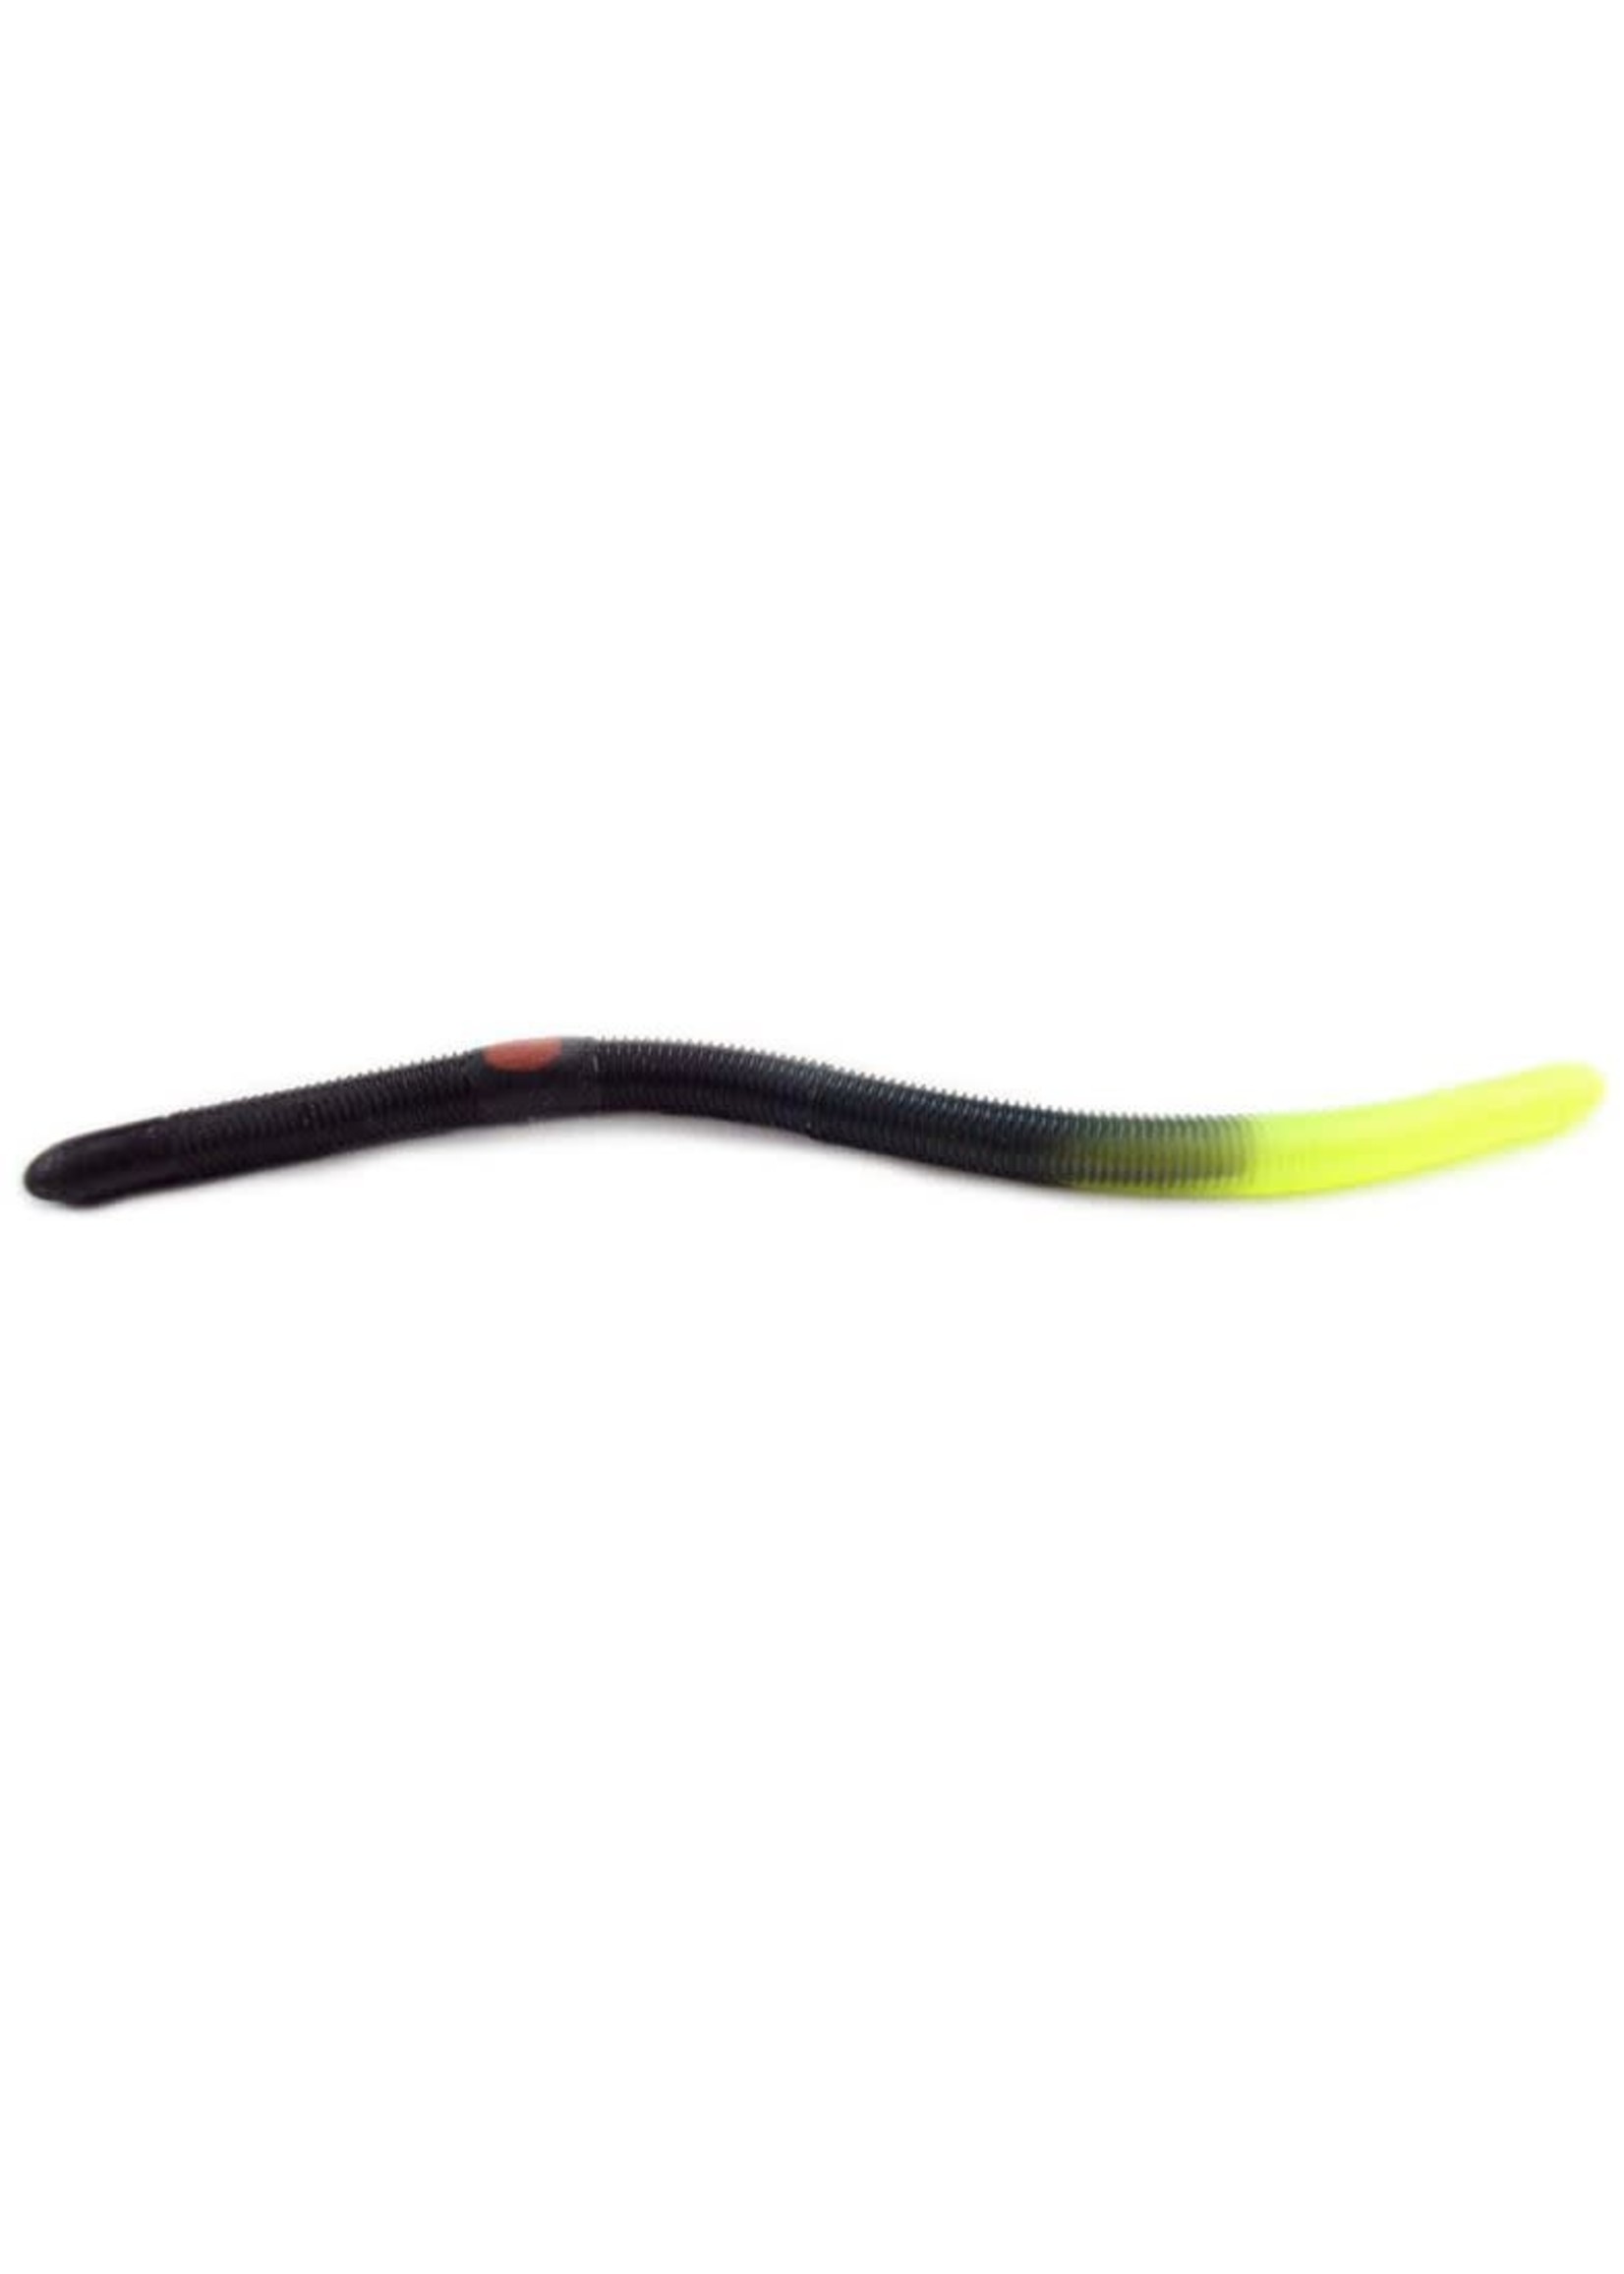 Kelly's Kelly's Pre Rigged Worms - Black Chartreuse Firetail